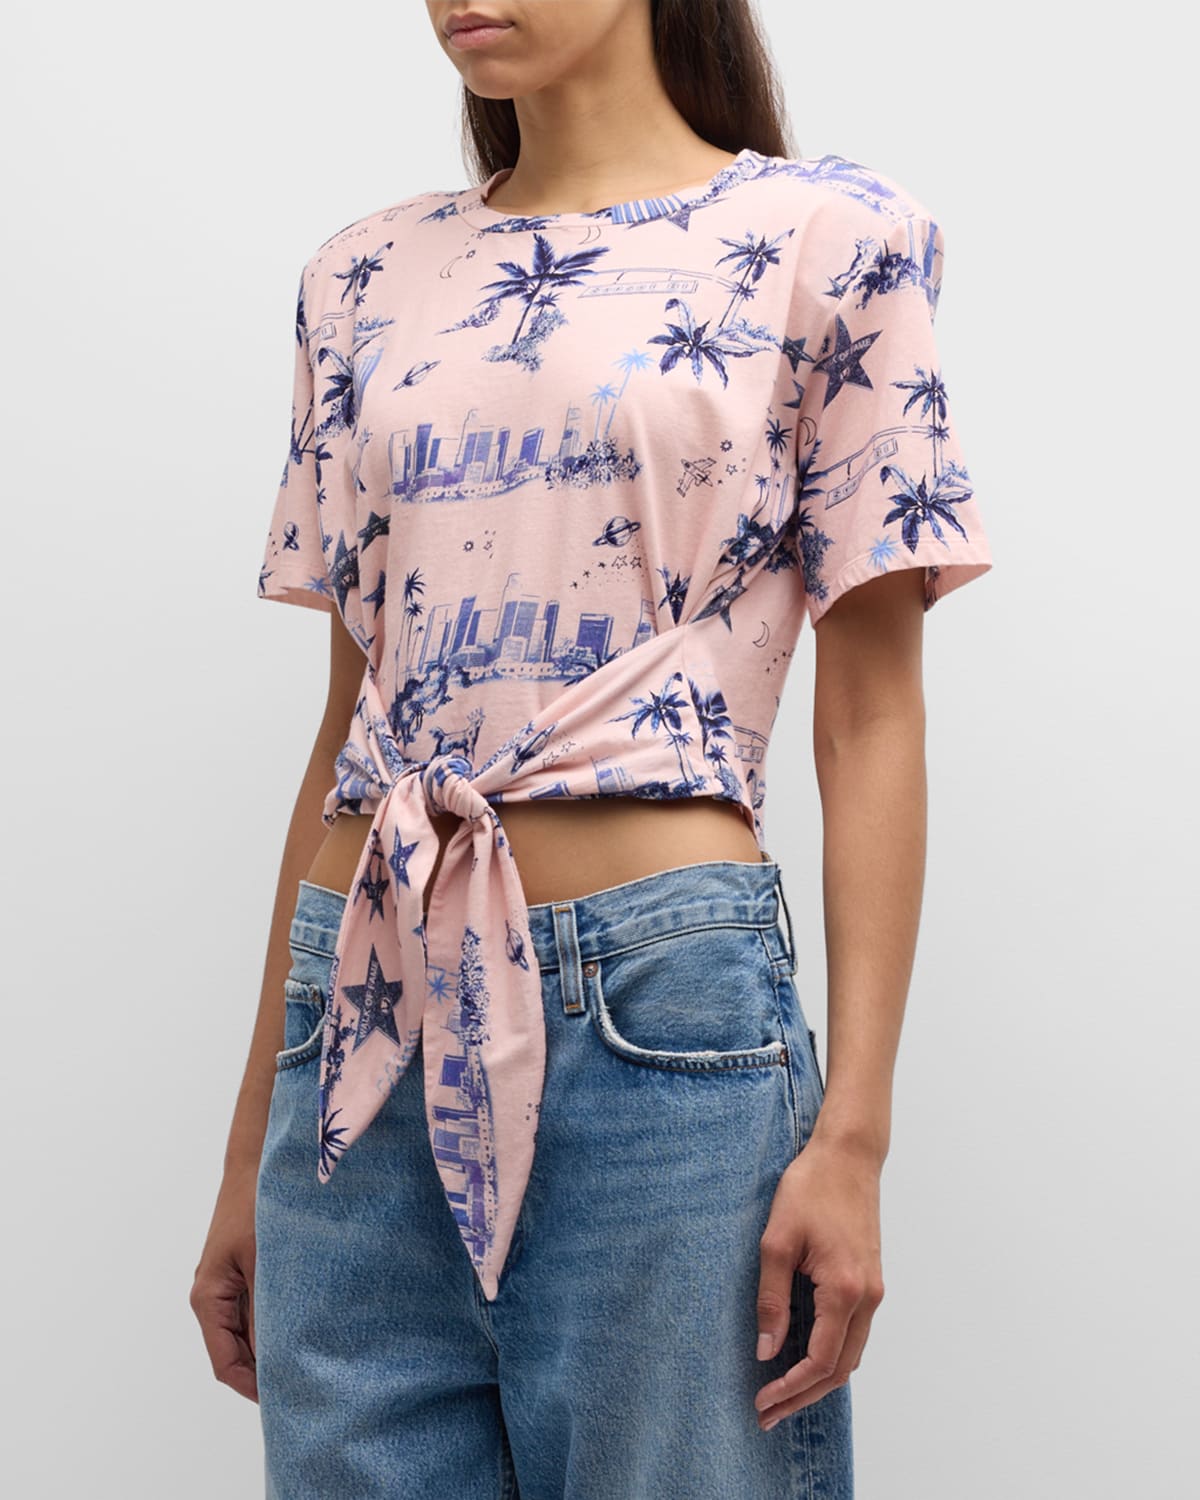 All Tied Up Tee